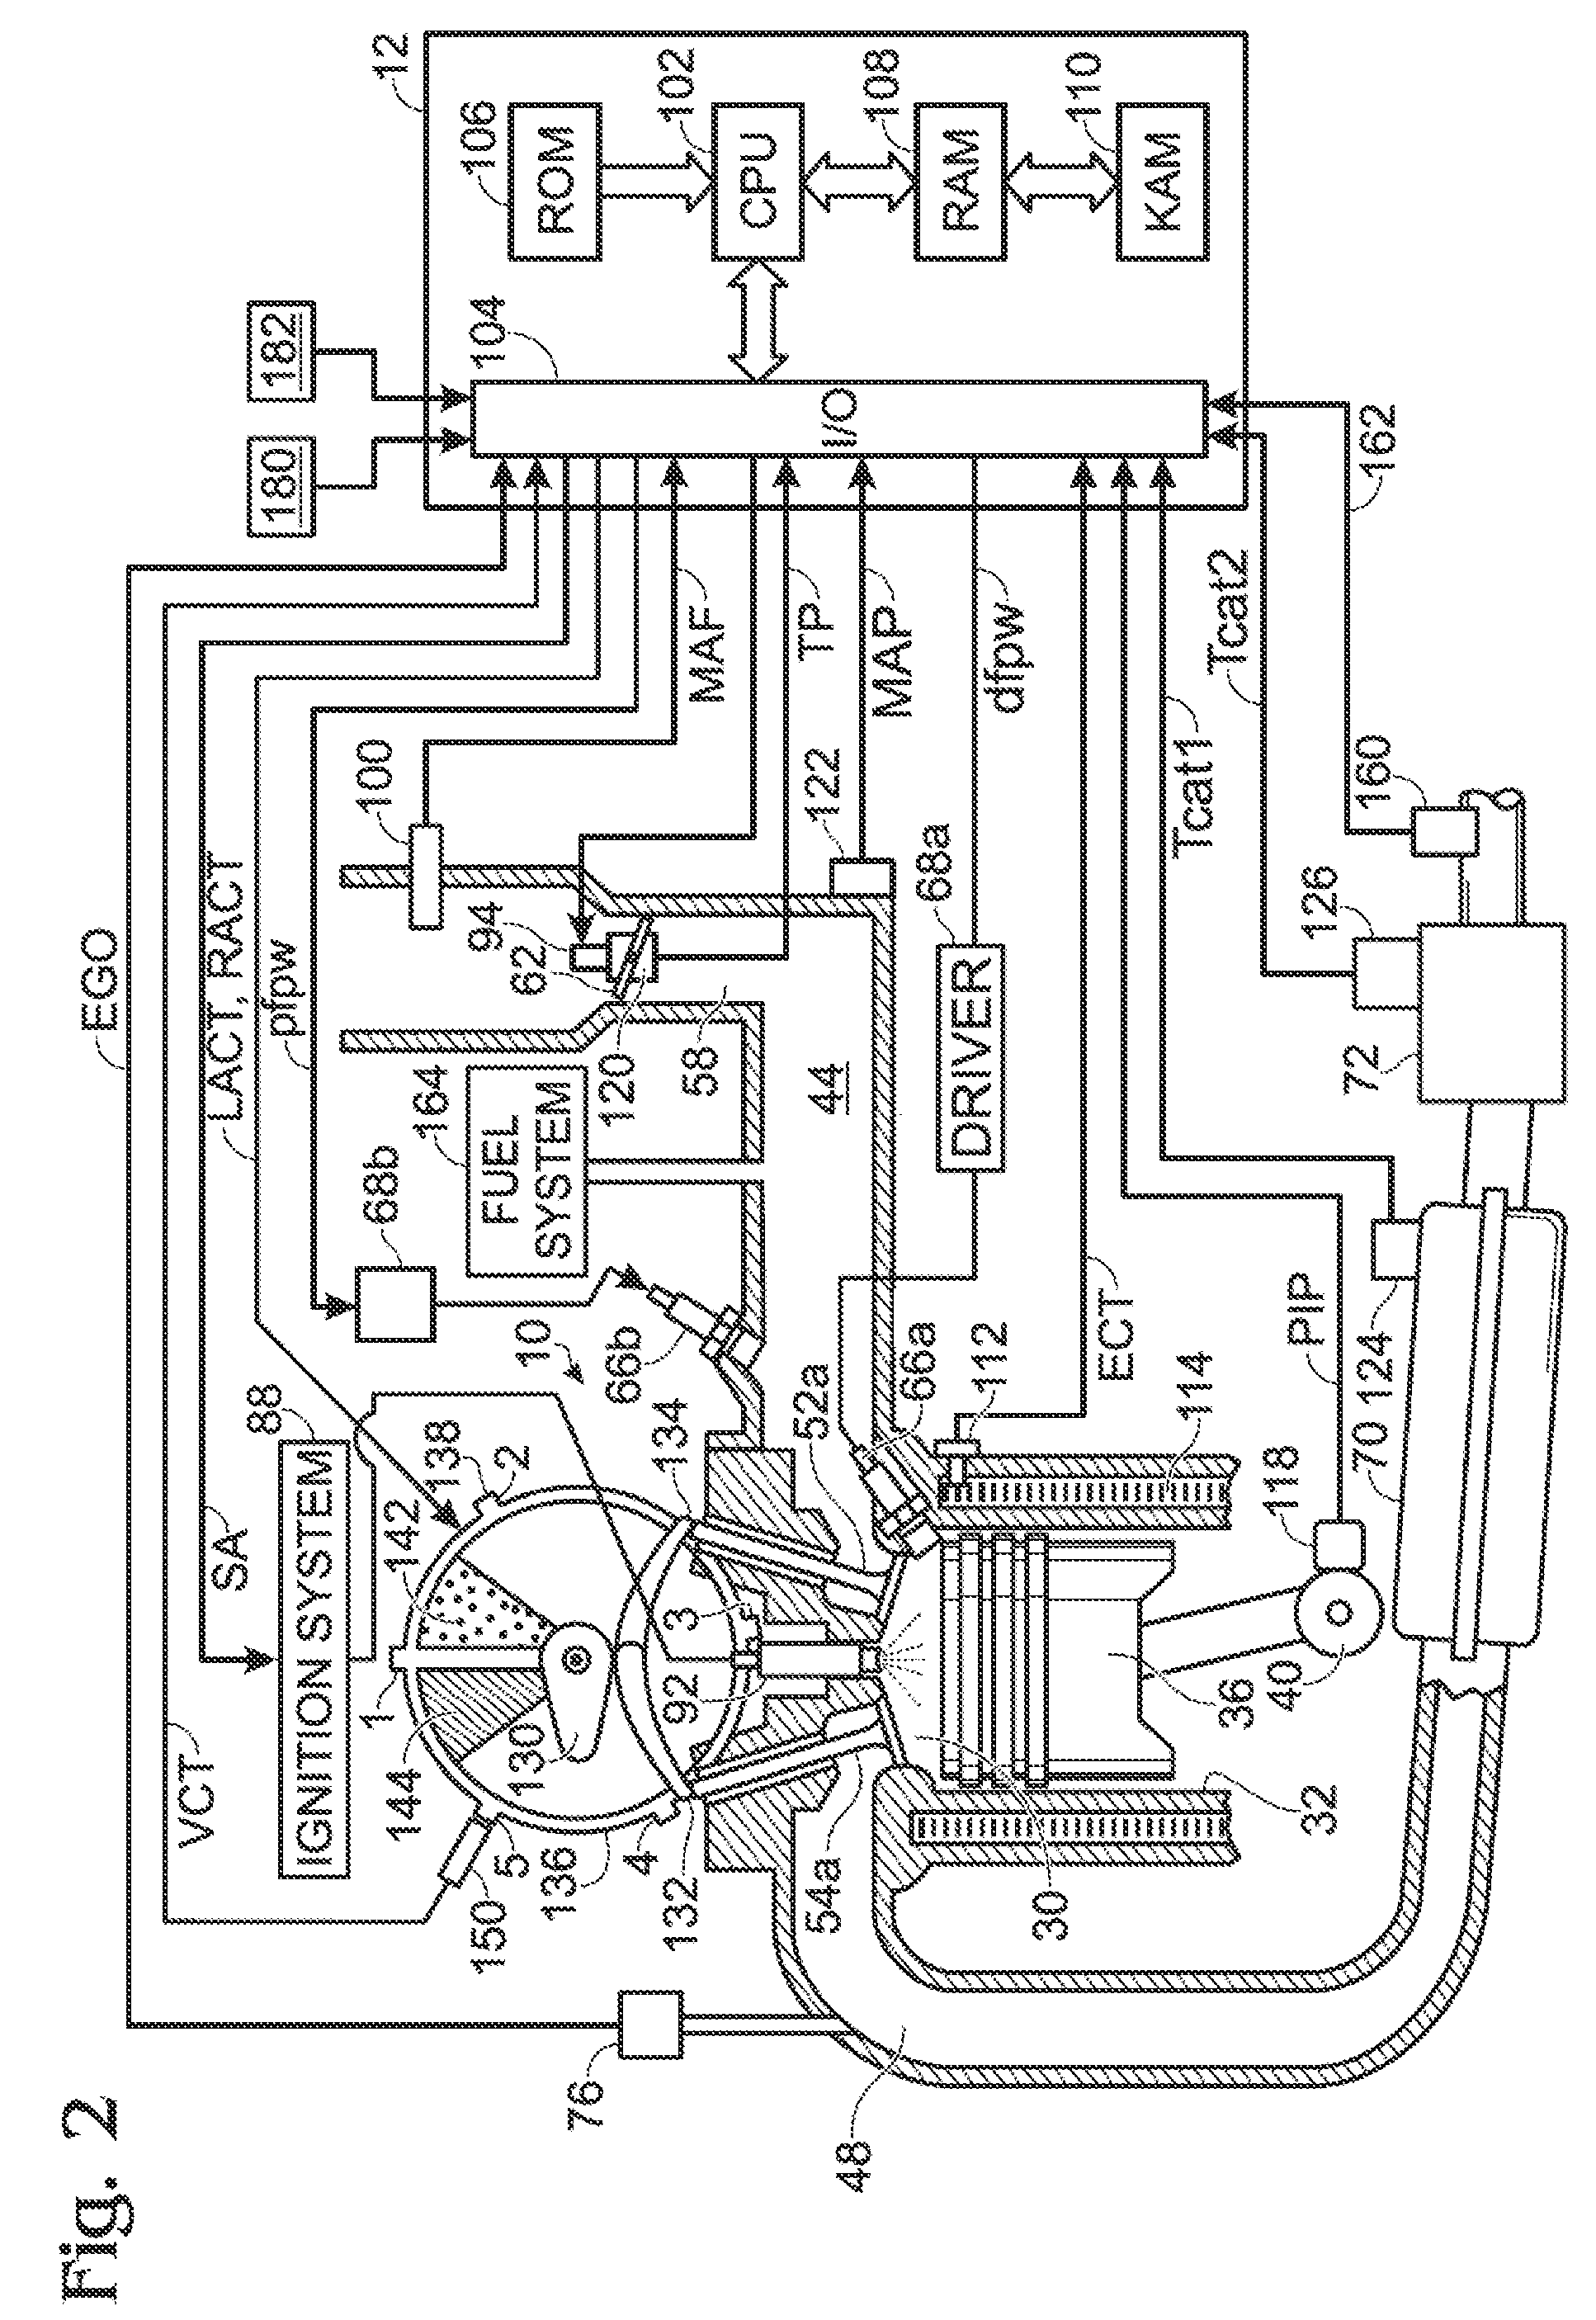 Multiple combustion mode engine using direct alcohol injection